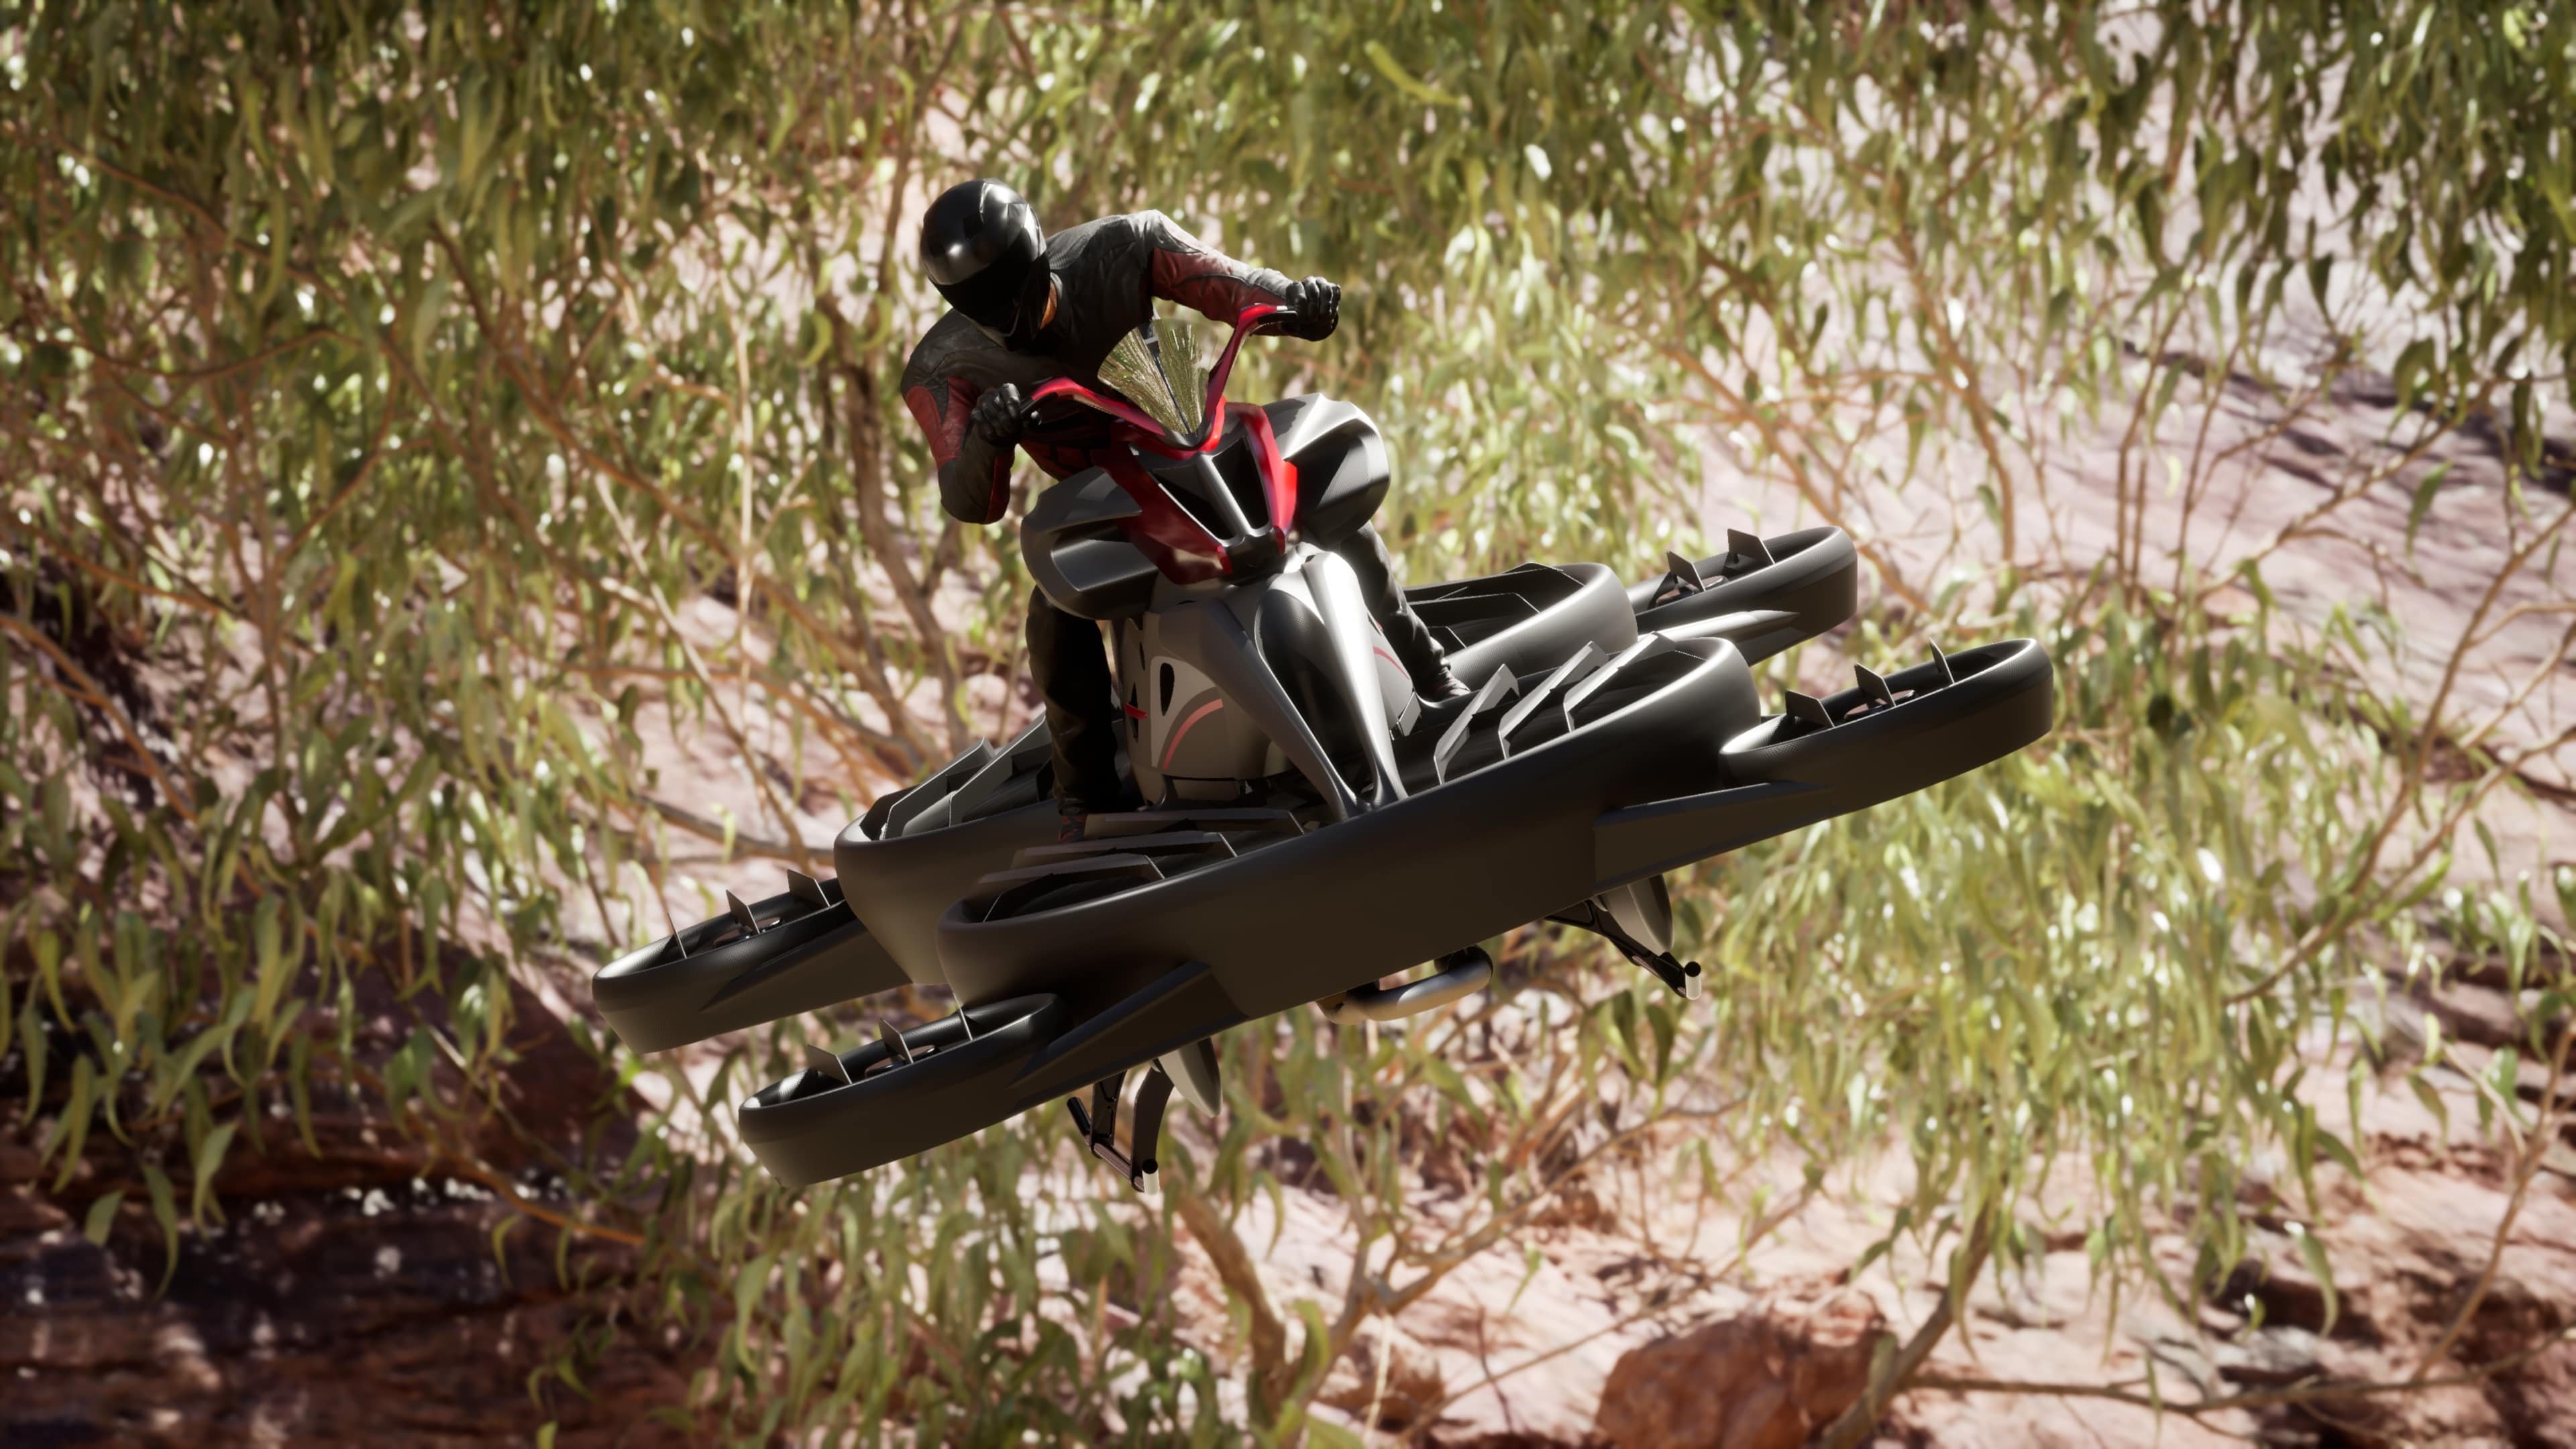 The XTurismo hoverbike. Photo: Handout